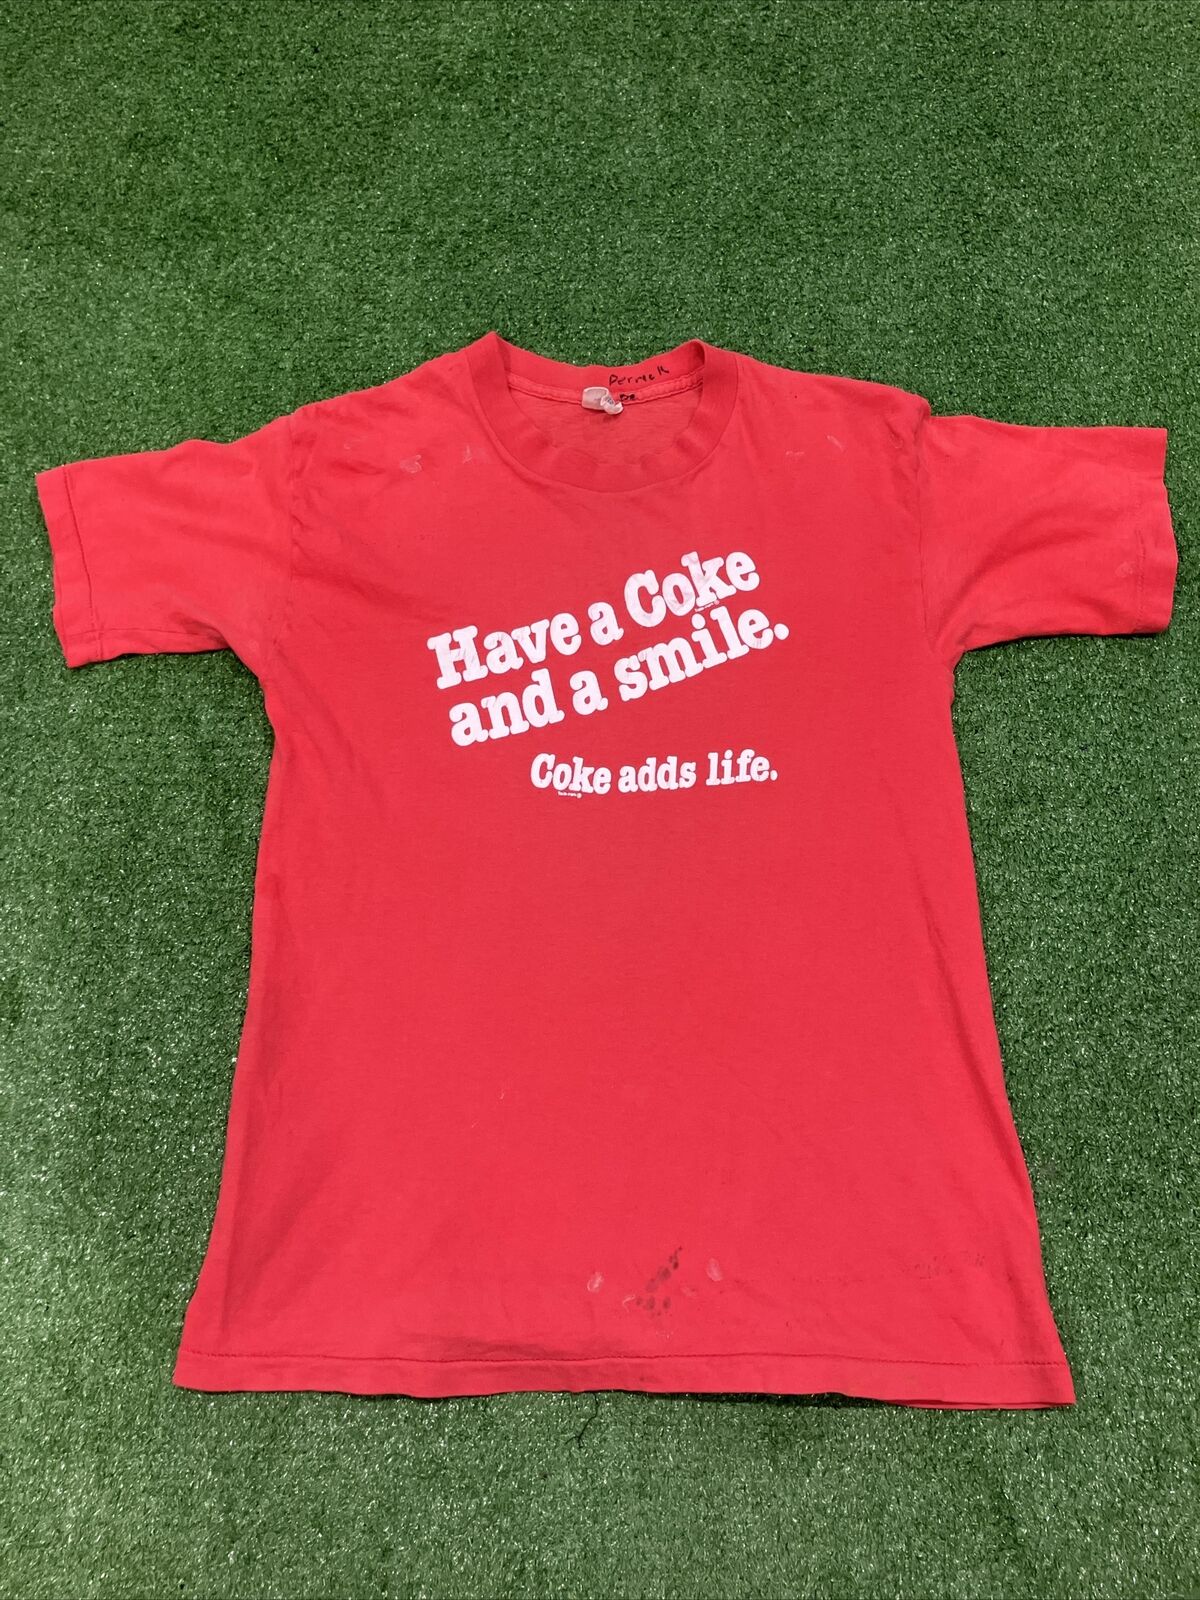 Vintage 80s Coca-Cola Adds Life One On One Basketball T-Shirt Size M  (XS 17x25)